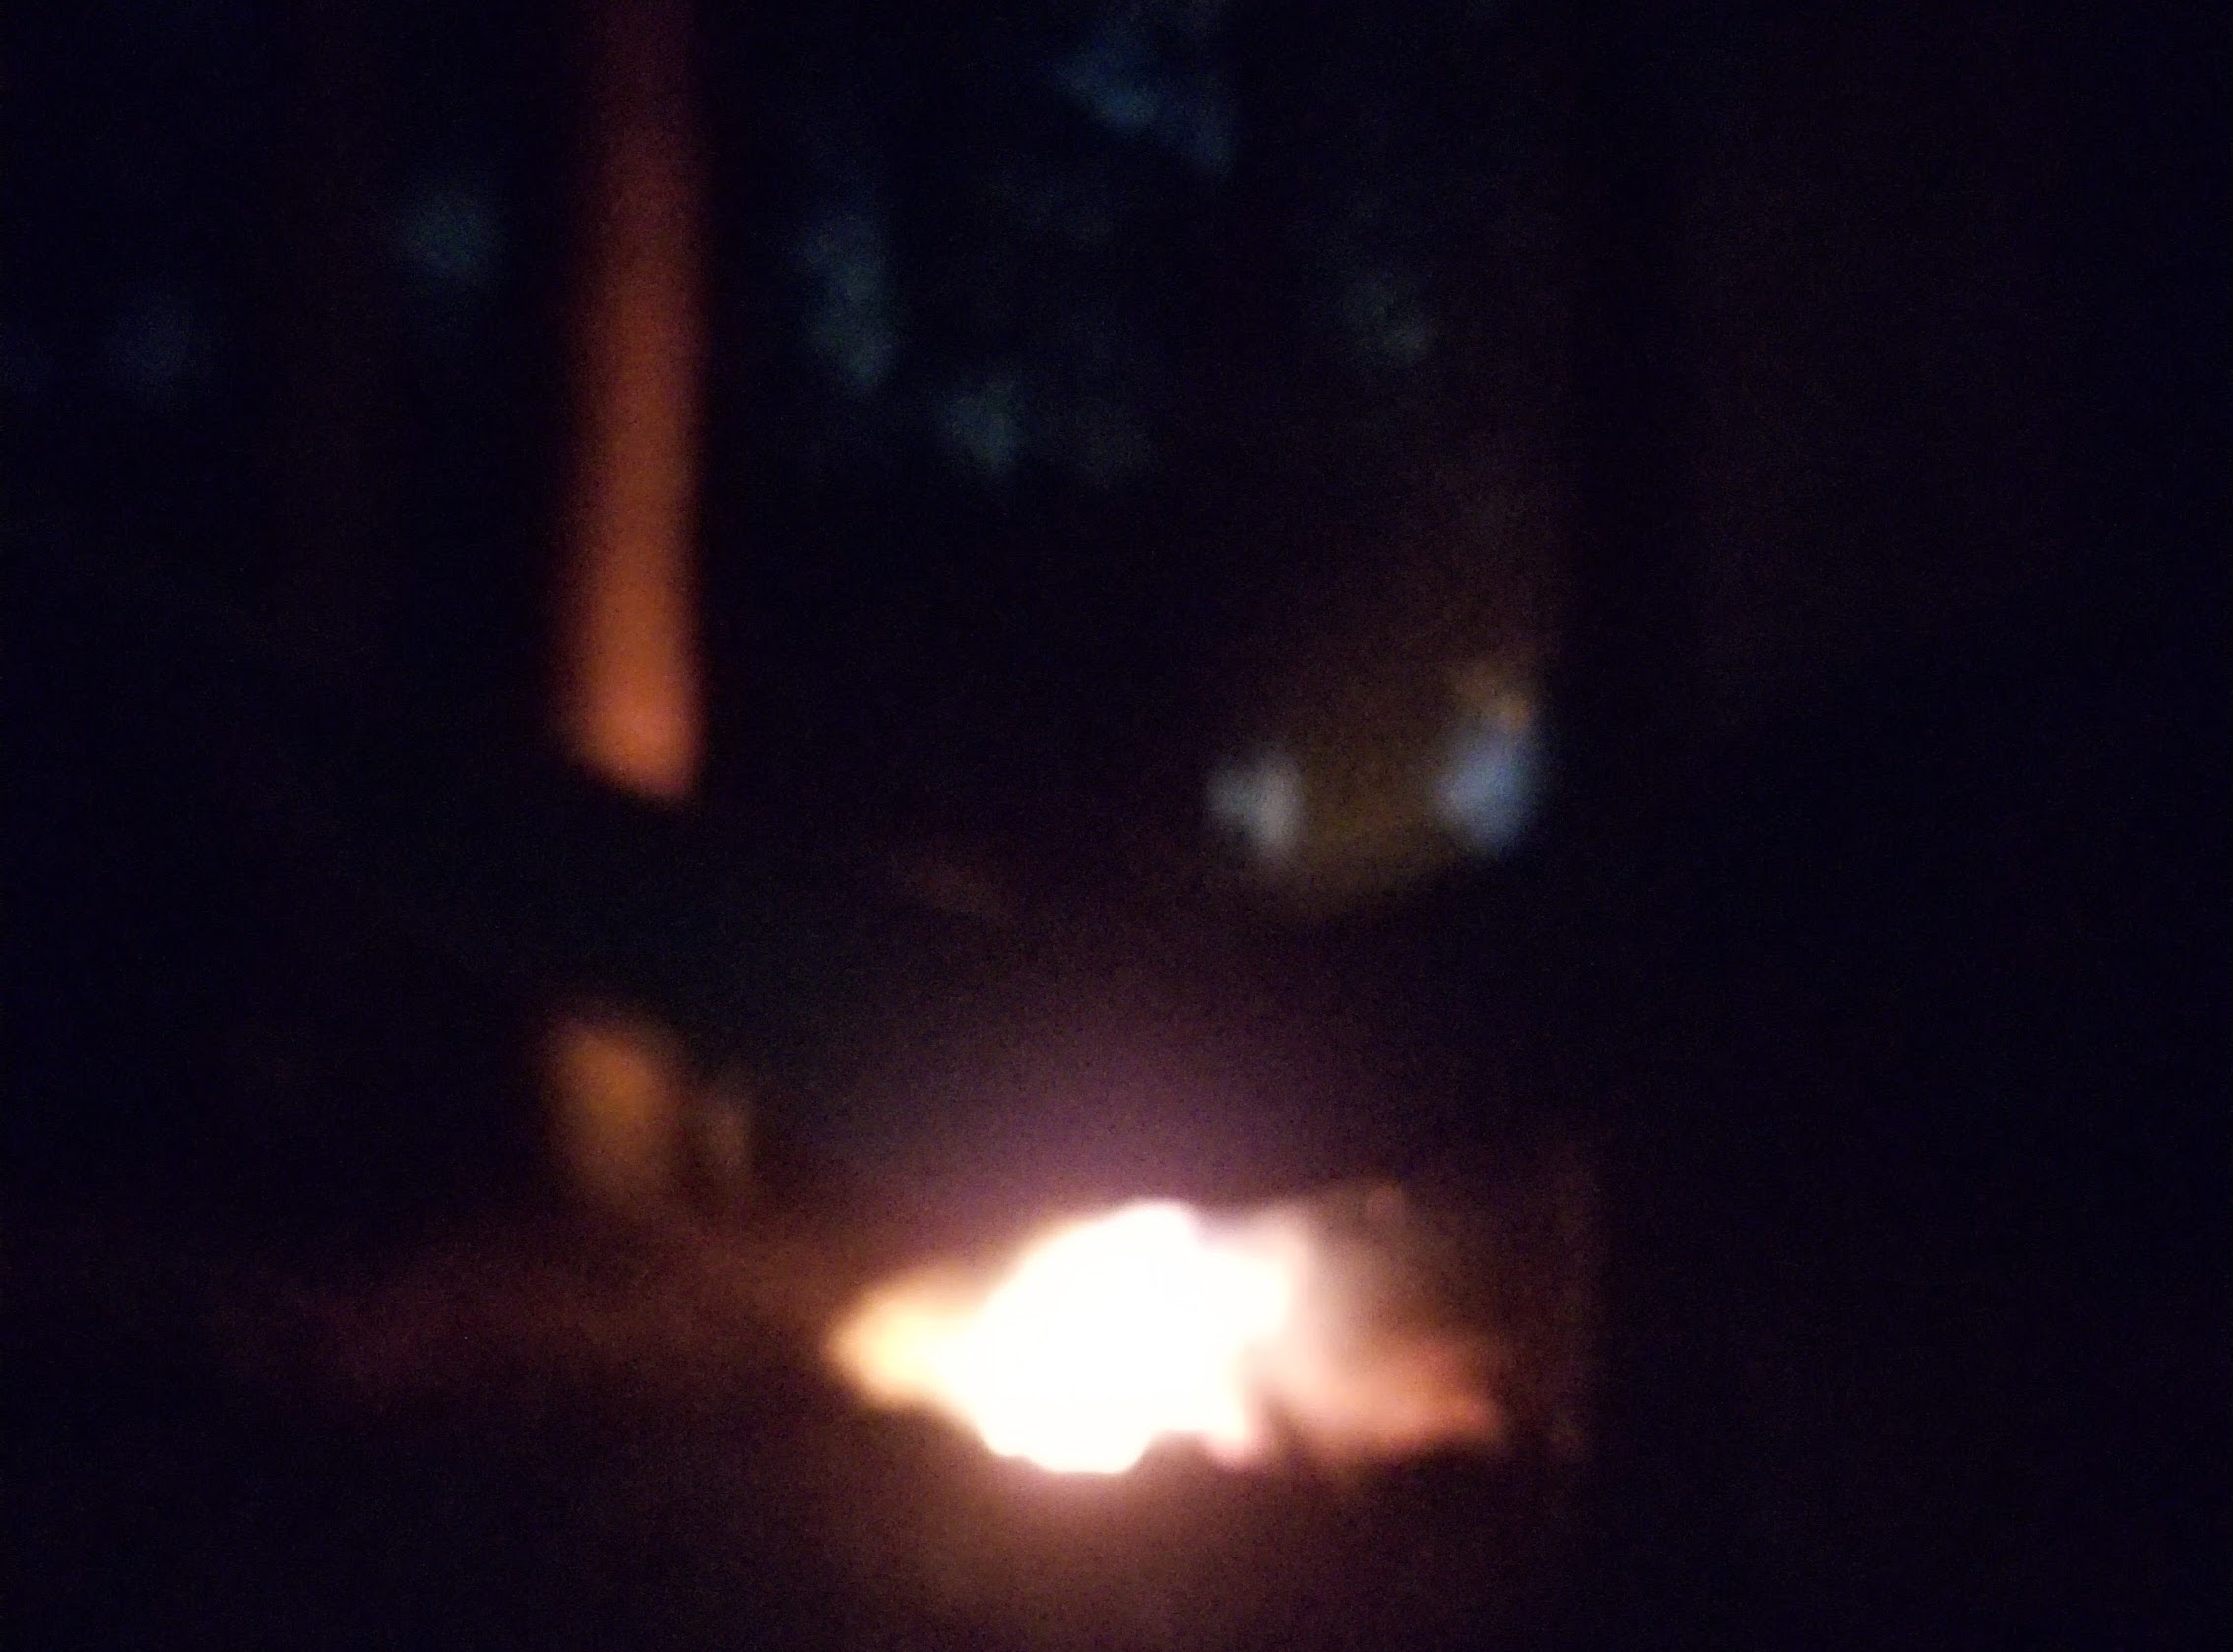 Blurry picture of campfire